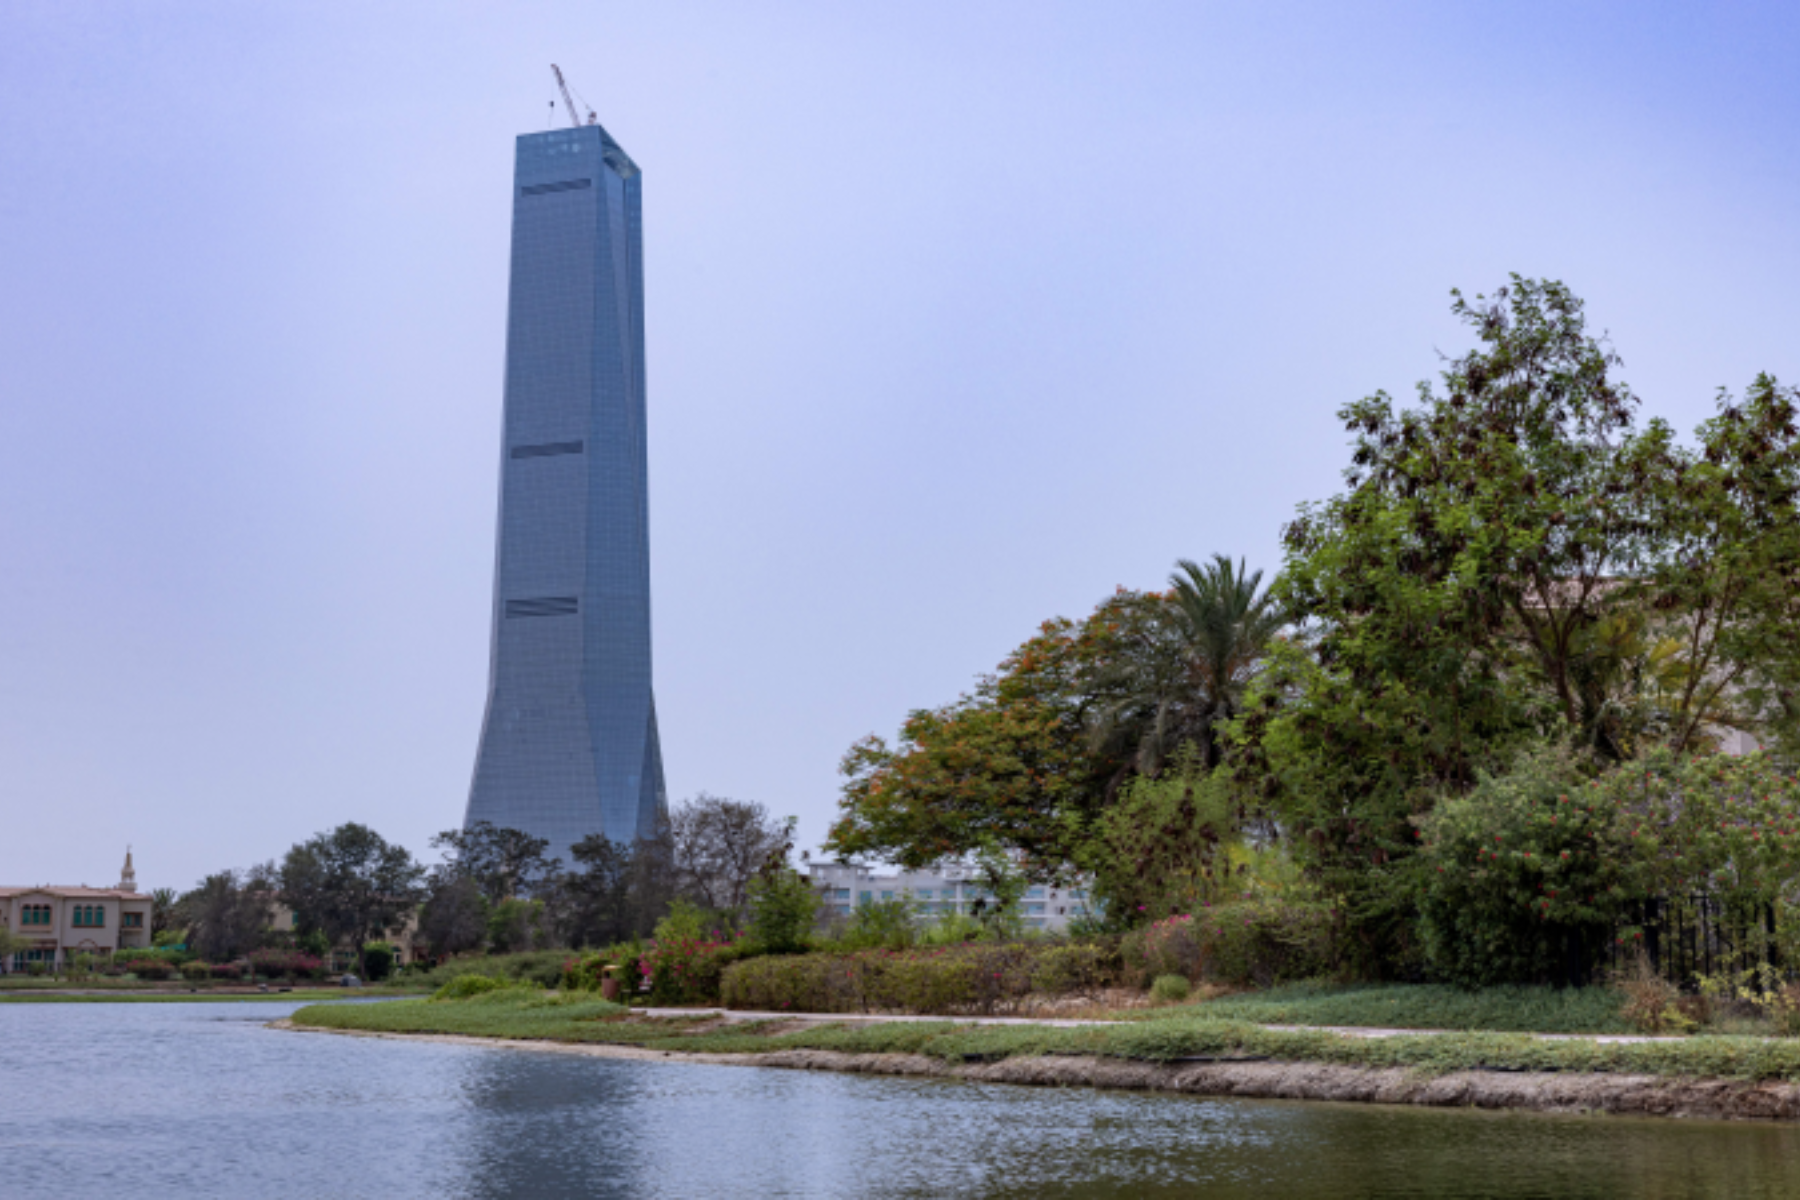 Dubai's DMCC Uptown Tower with trees and a river